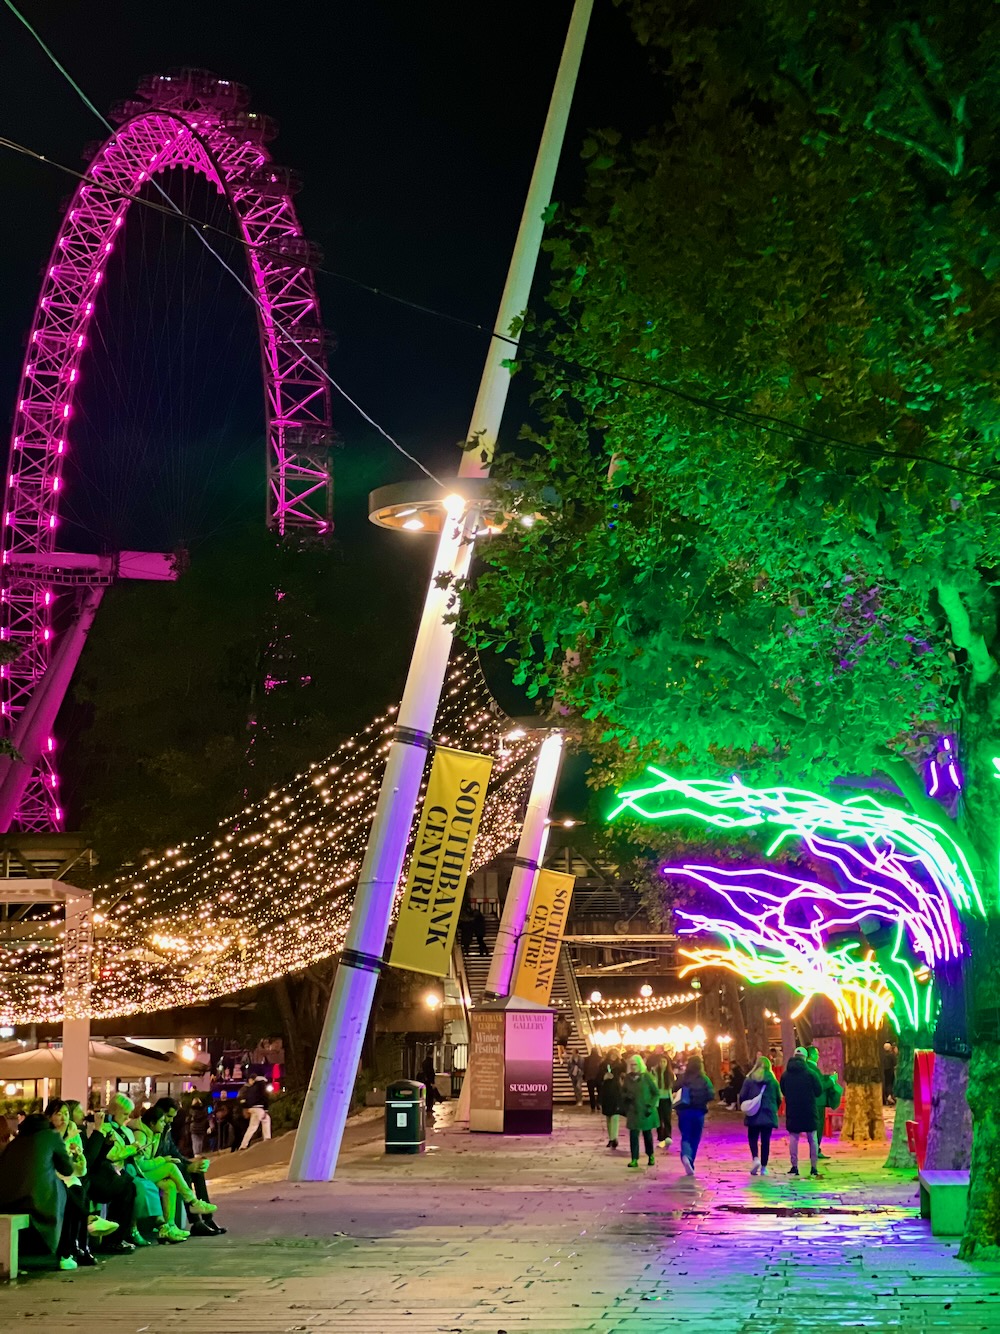 View of the London Eye and Loomin, an electric neon canopy sculpted by David Ogle along Queen’s Walk near South Bank Centre in London. Photo Credit: © Ursula Petula Barzey.